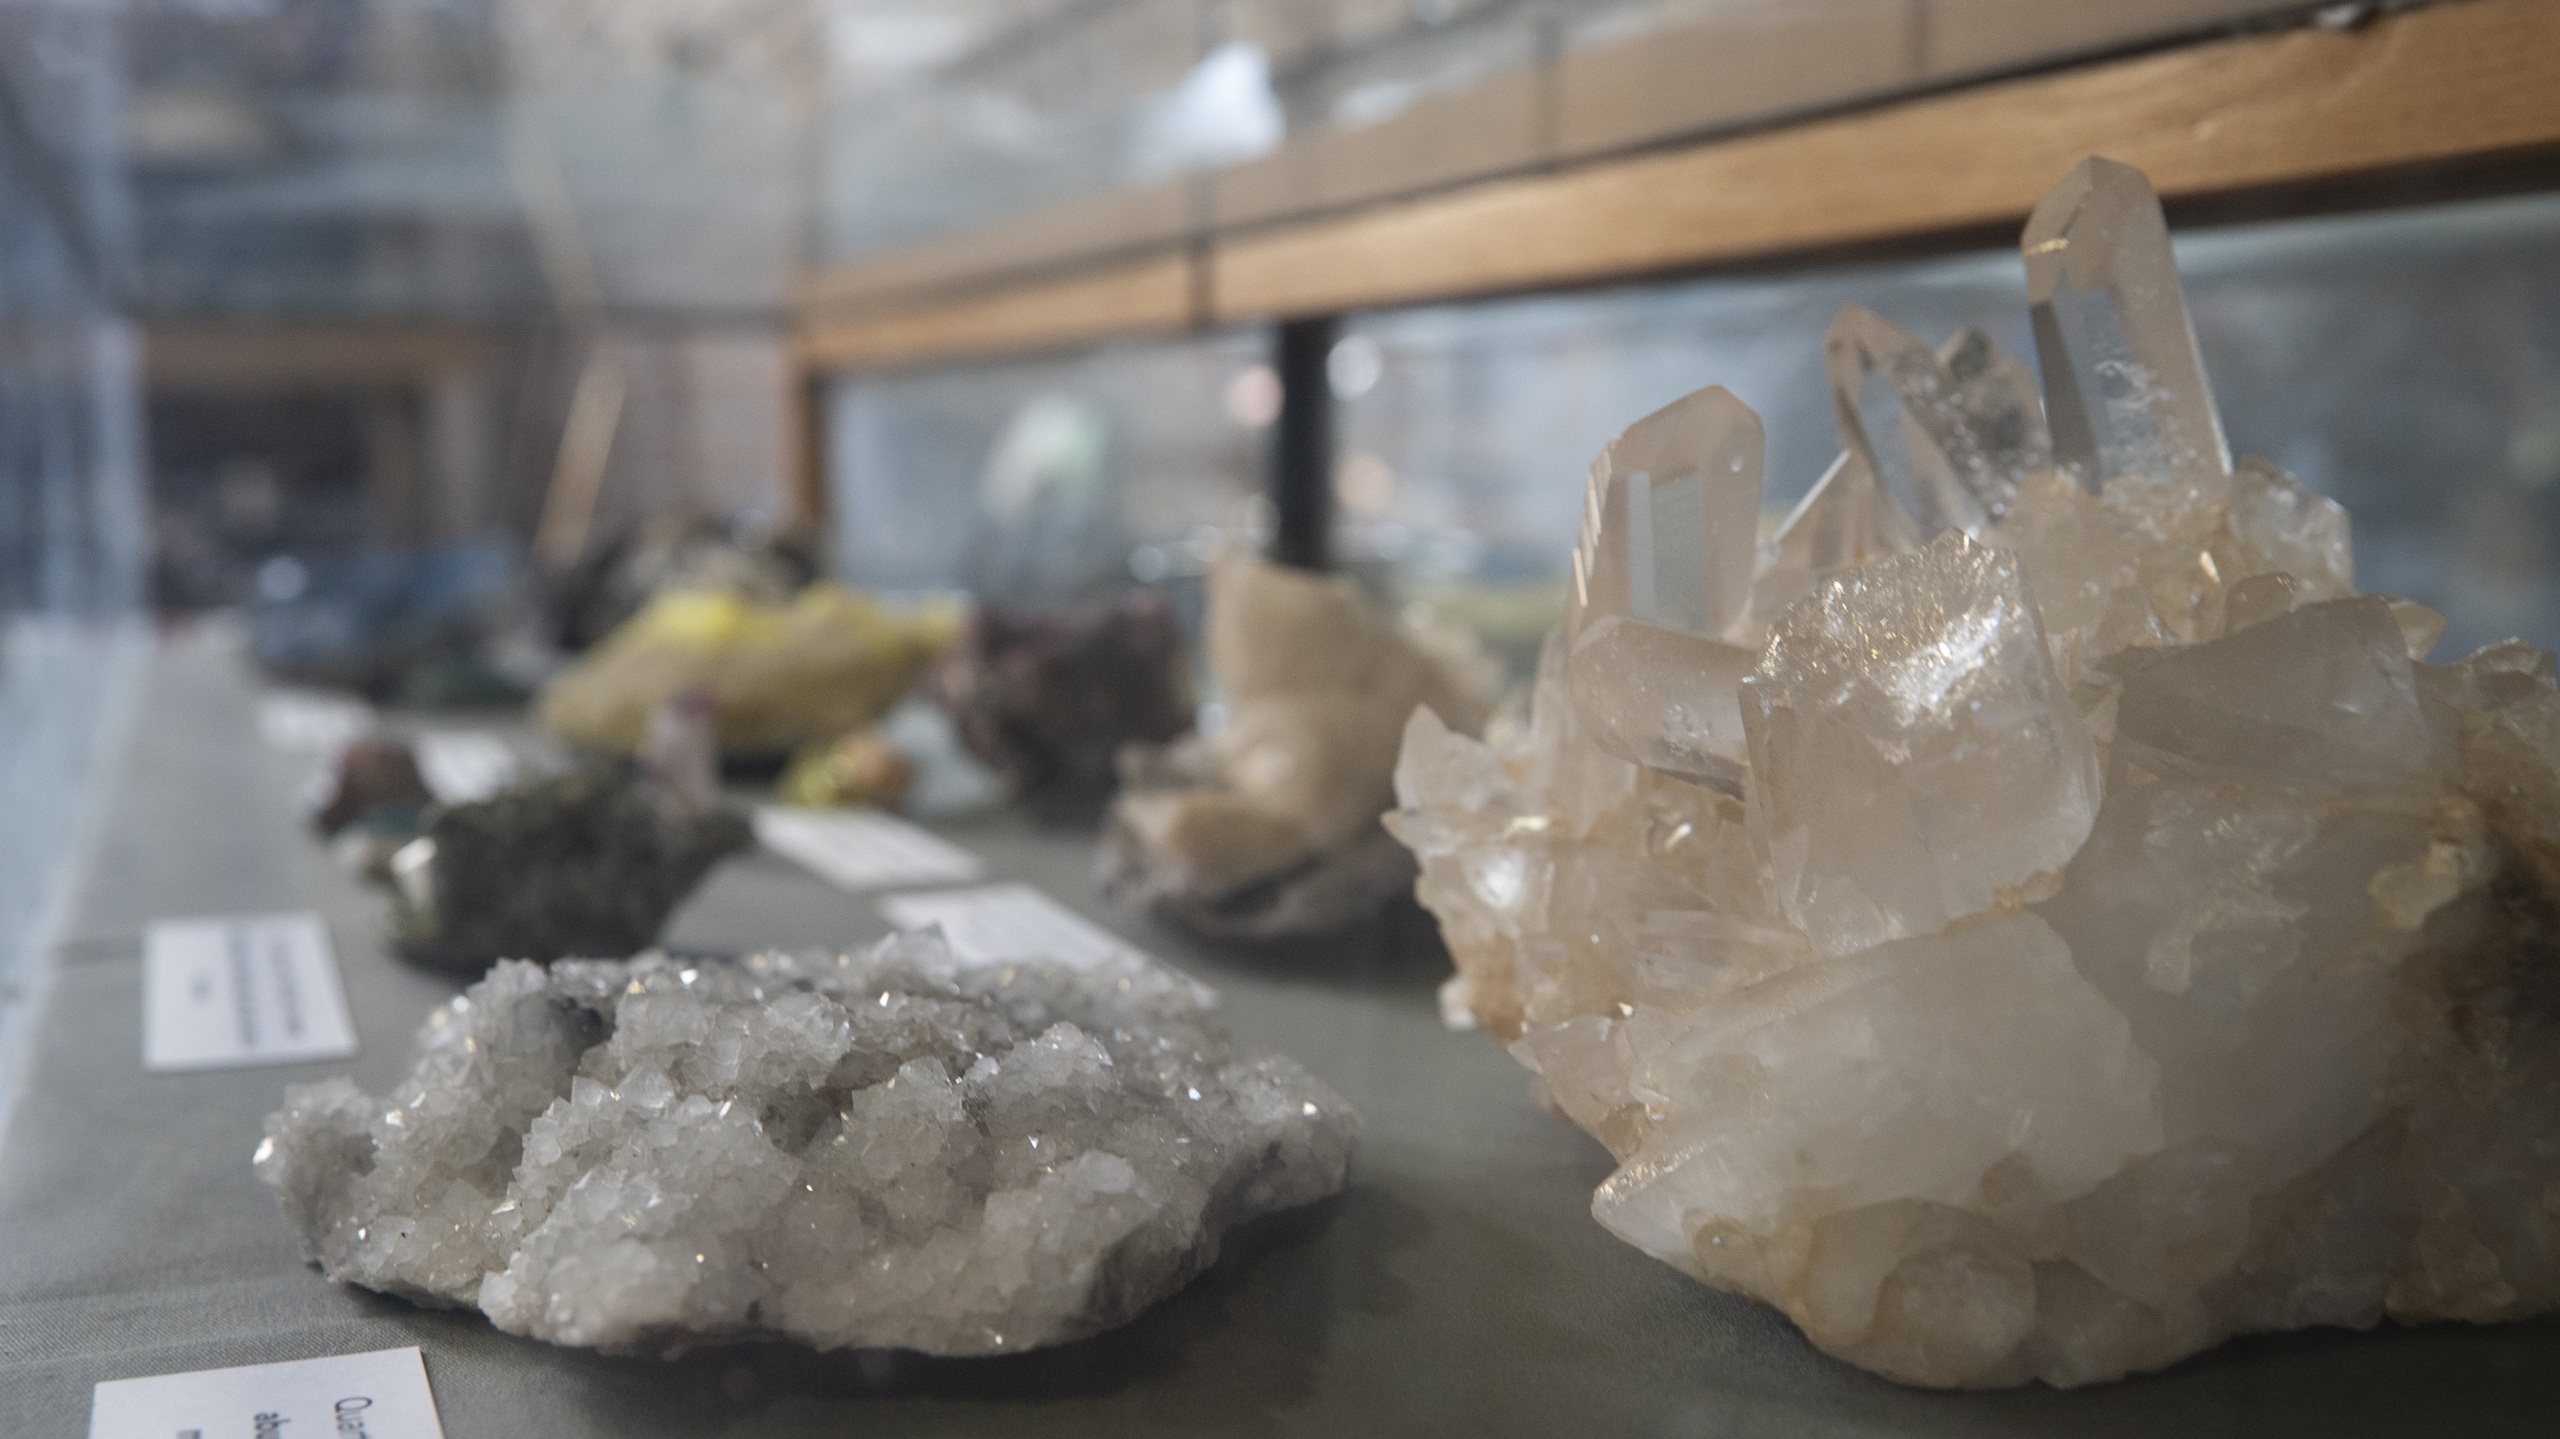 Quartz samples are among the pieces from the University of La Verne’s Cultural & Natural History Collections on display as part of an exhibit at the L.A. County Fair.